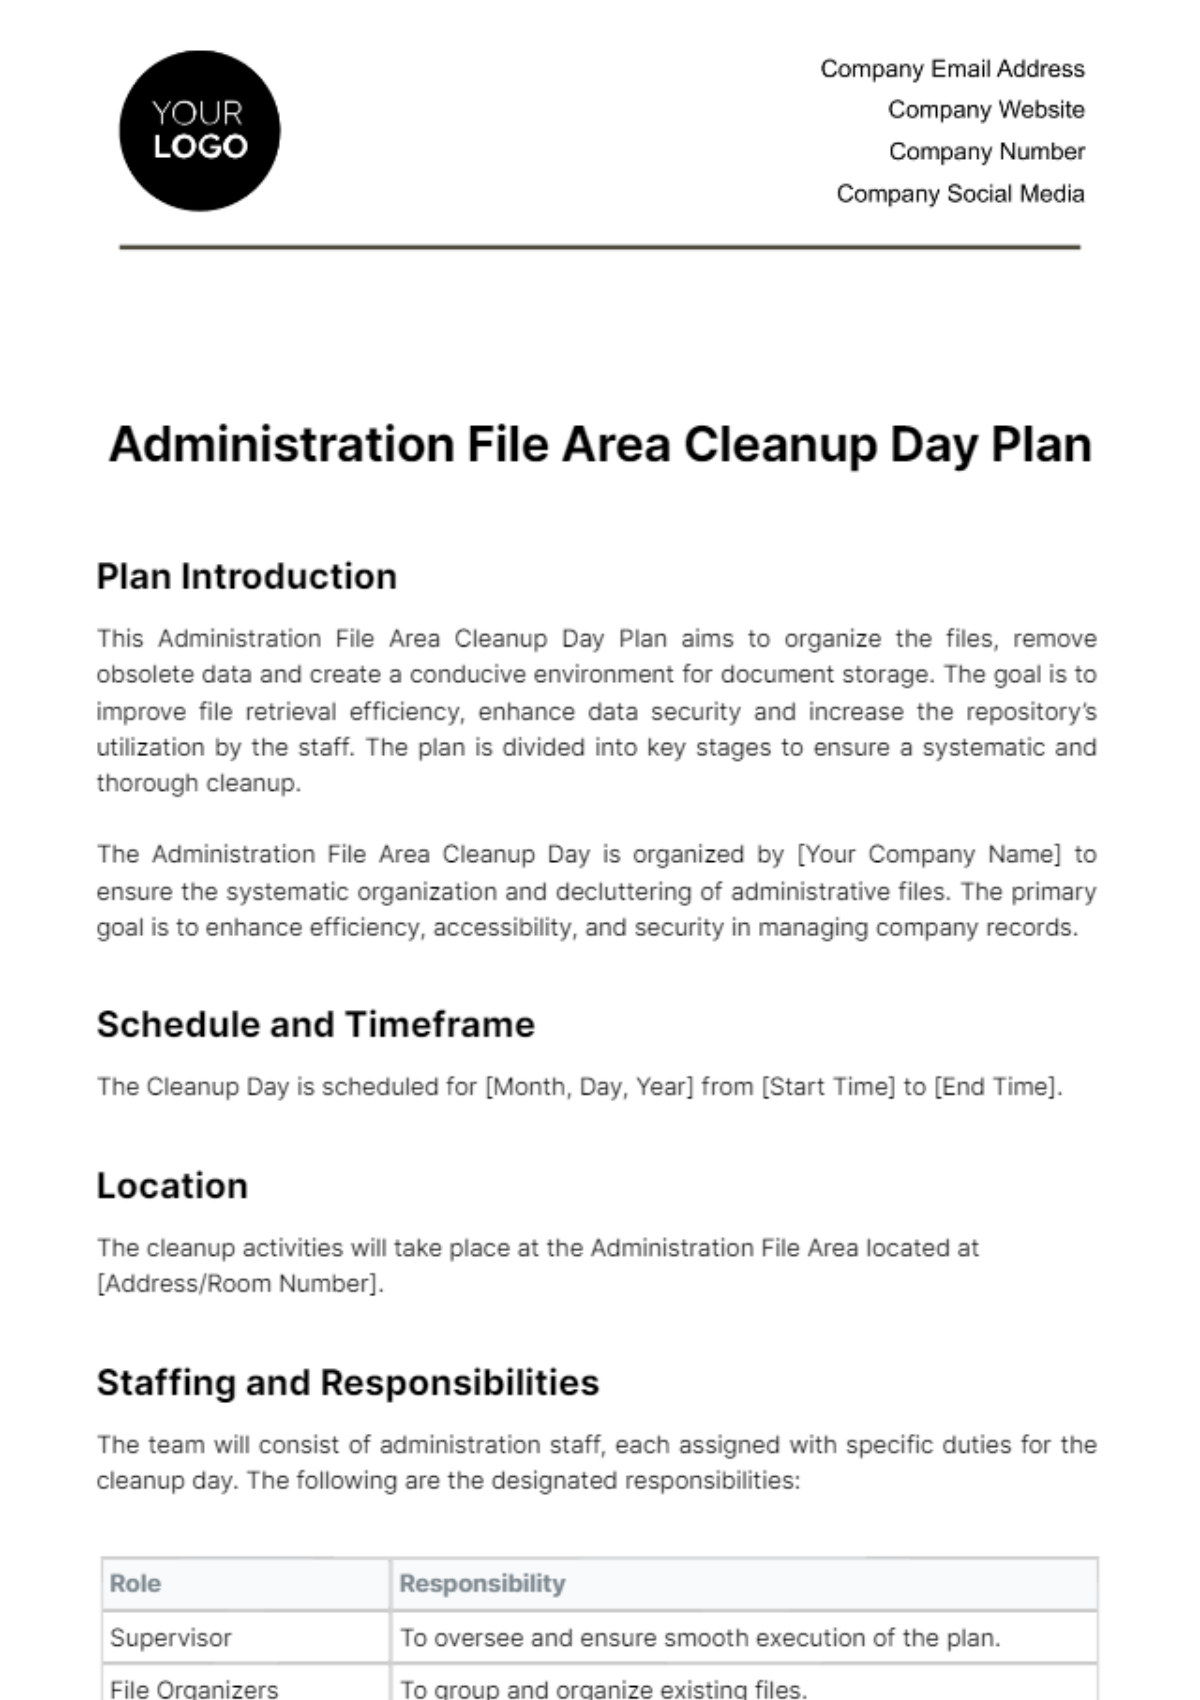 Free Administration File Area Cleanup Day Plan Template